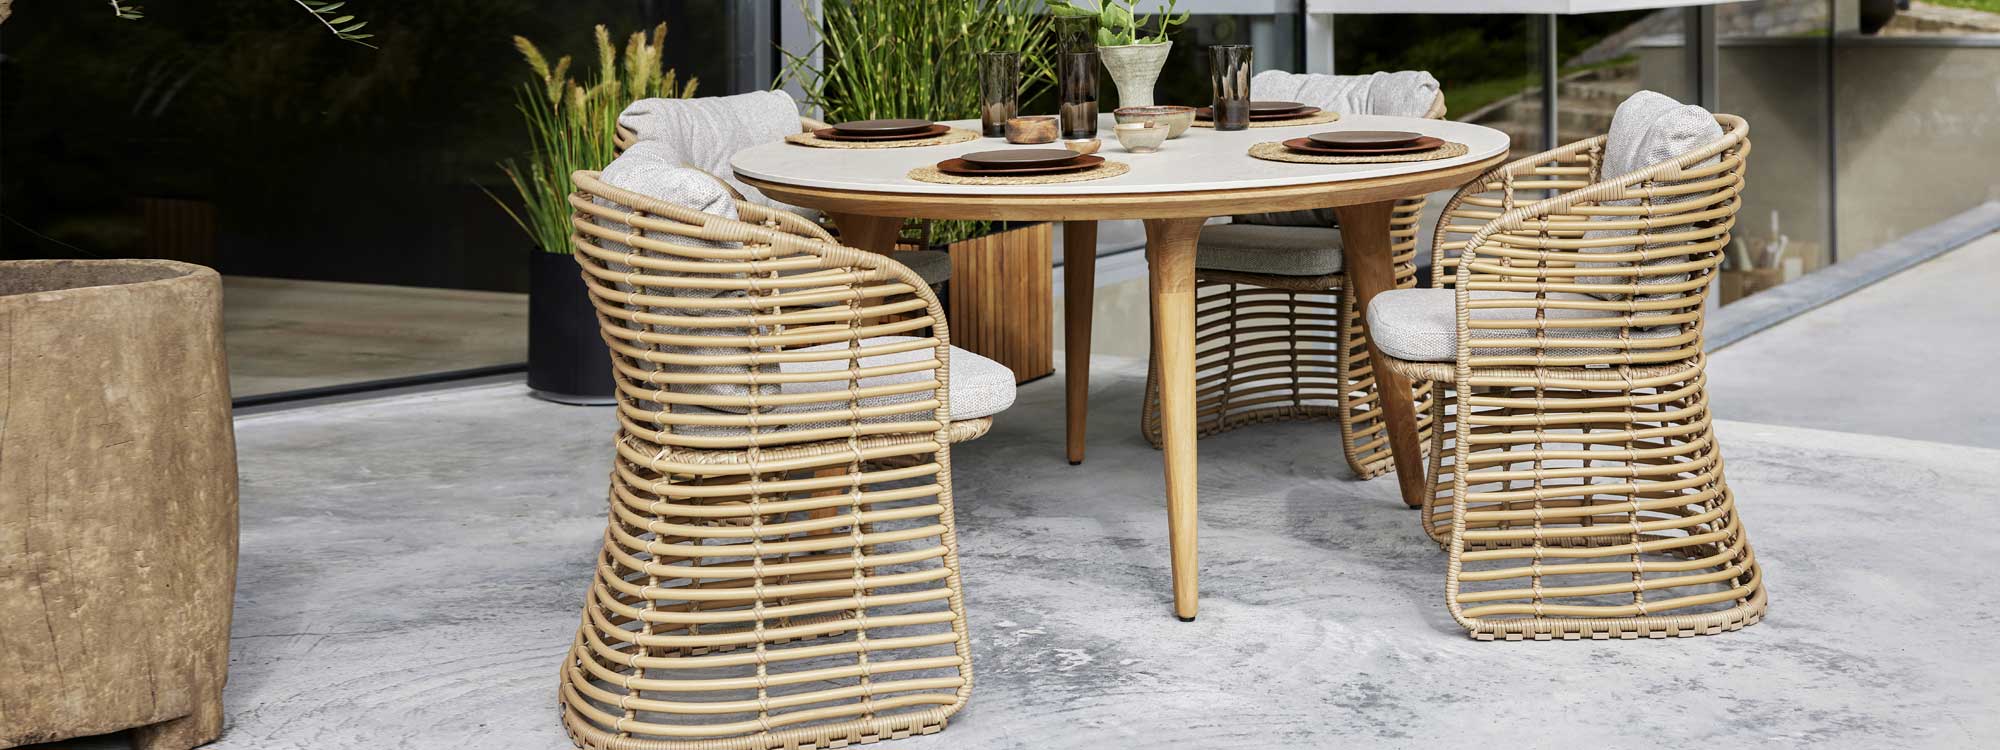 Image of Basket chair in natural cane with Aspect round teak table by Cane-line